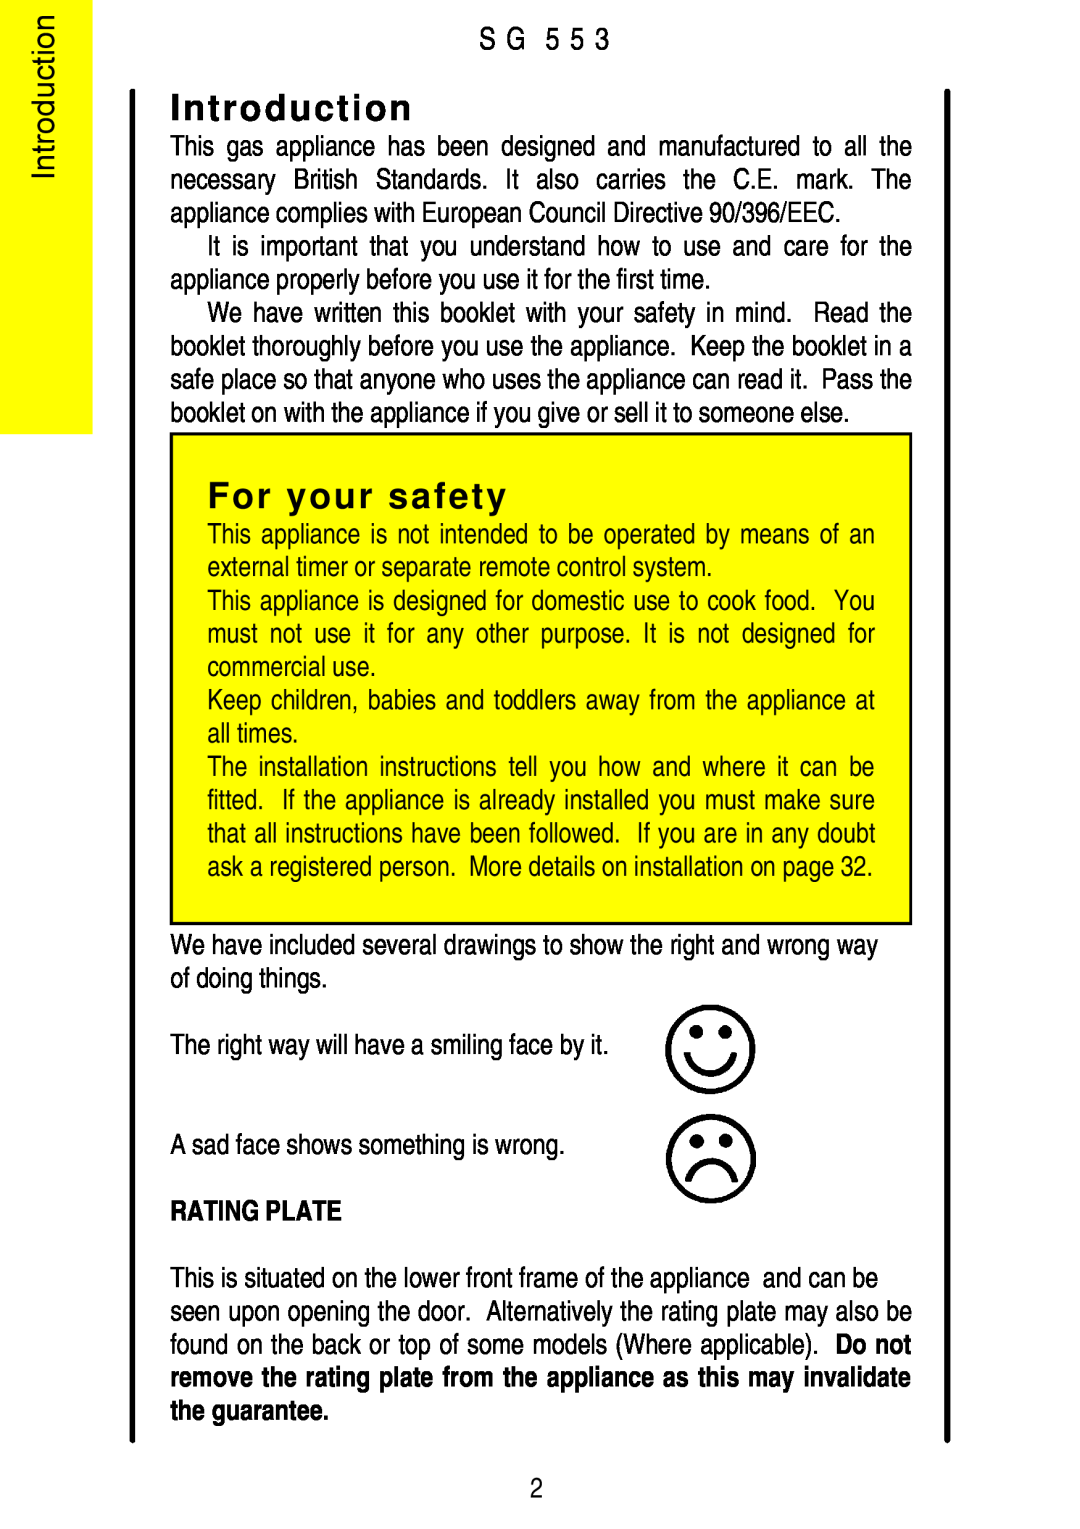 Parkinson Cowan SG 553 installation instructions Introduction, For your safety, S G, Rating Plate 